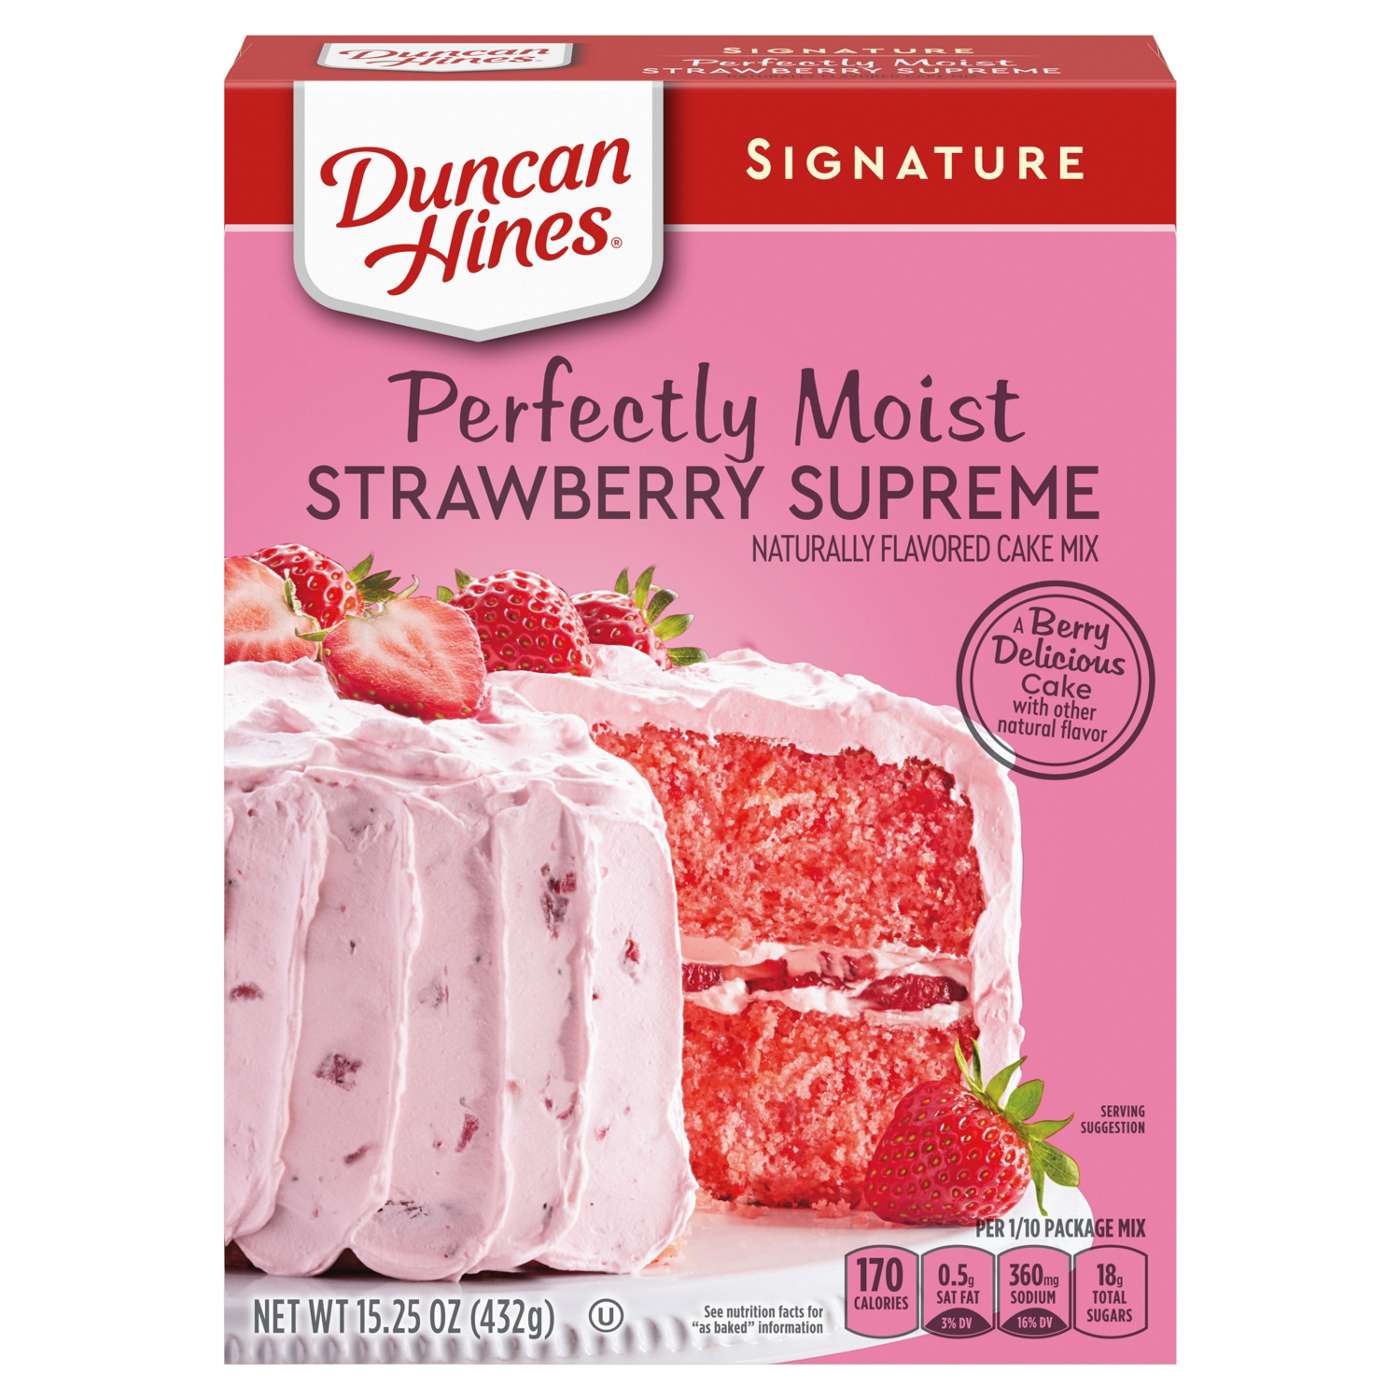 Duncan Hines Signature Perfectly Moist Strawberry Supreme Cake Mix; image 1 of 7